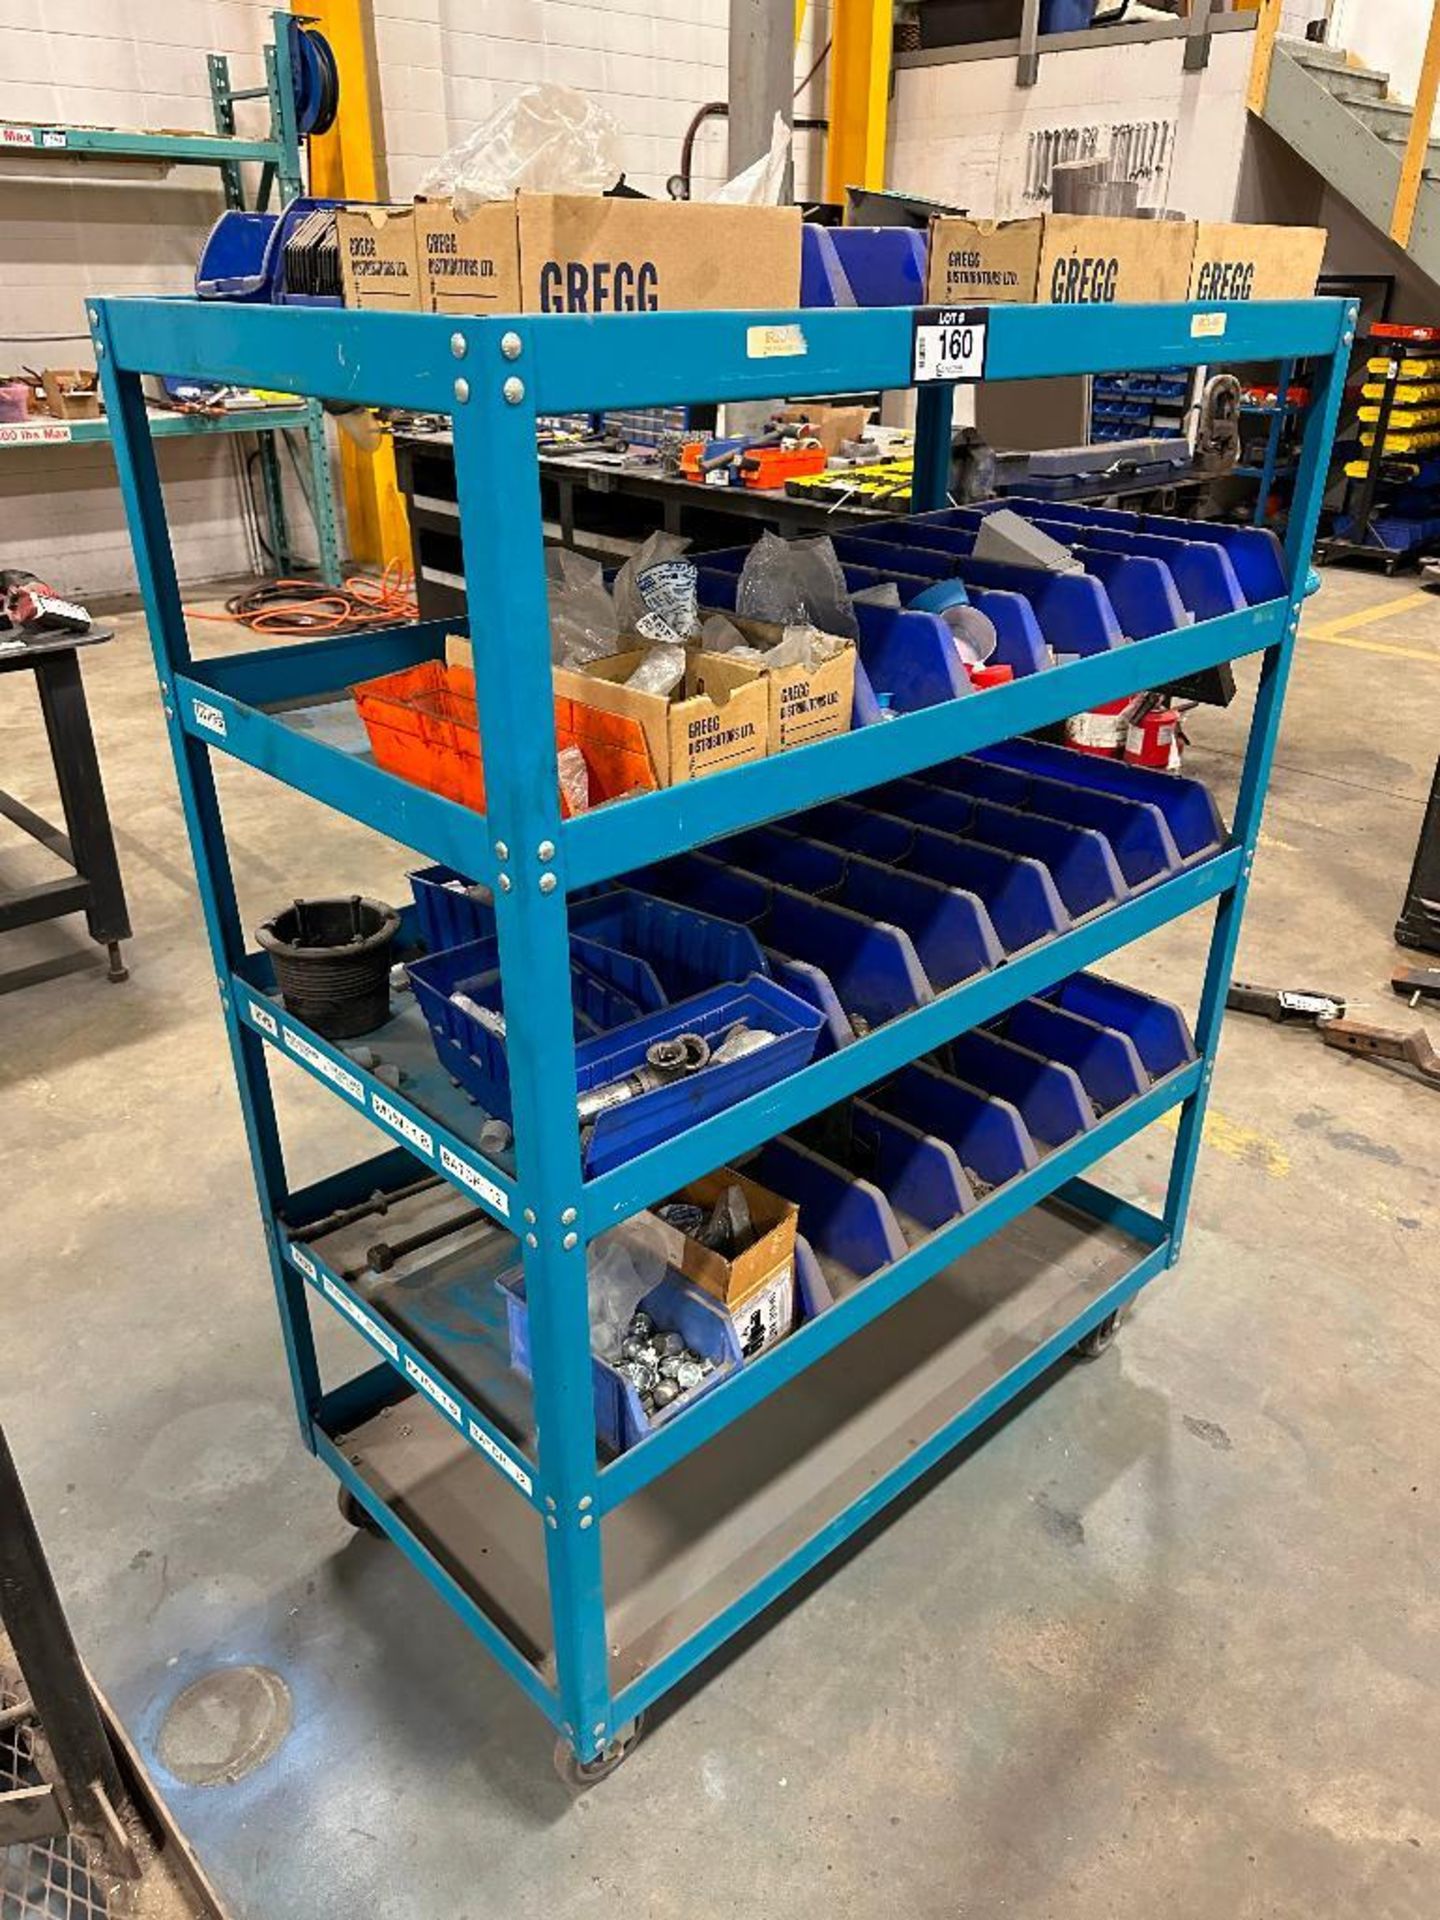 48" X 24" X 61" Mobile 5-Tier Shelf w/ Contents Including Parts Bins, Fittings, etc. - Image 11 of 15